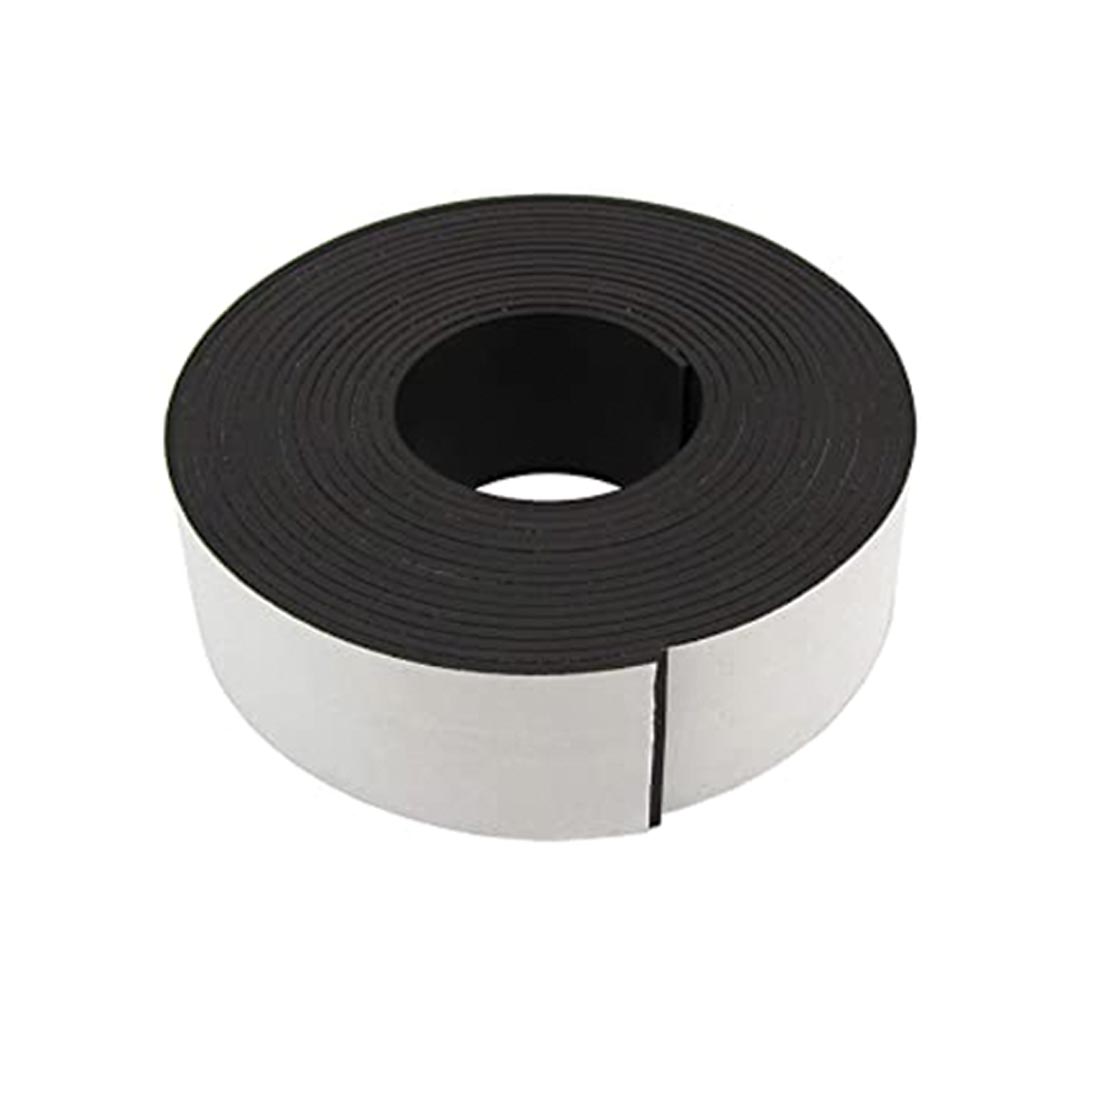 Magnet Source 1" by 10 Feet Magnet Tape With Adhesive shown both in and out of package